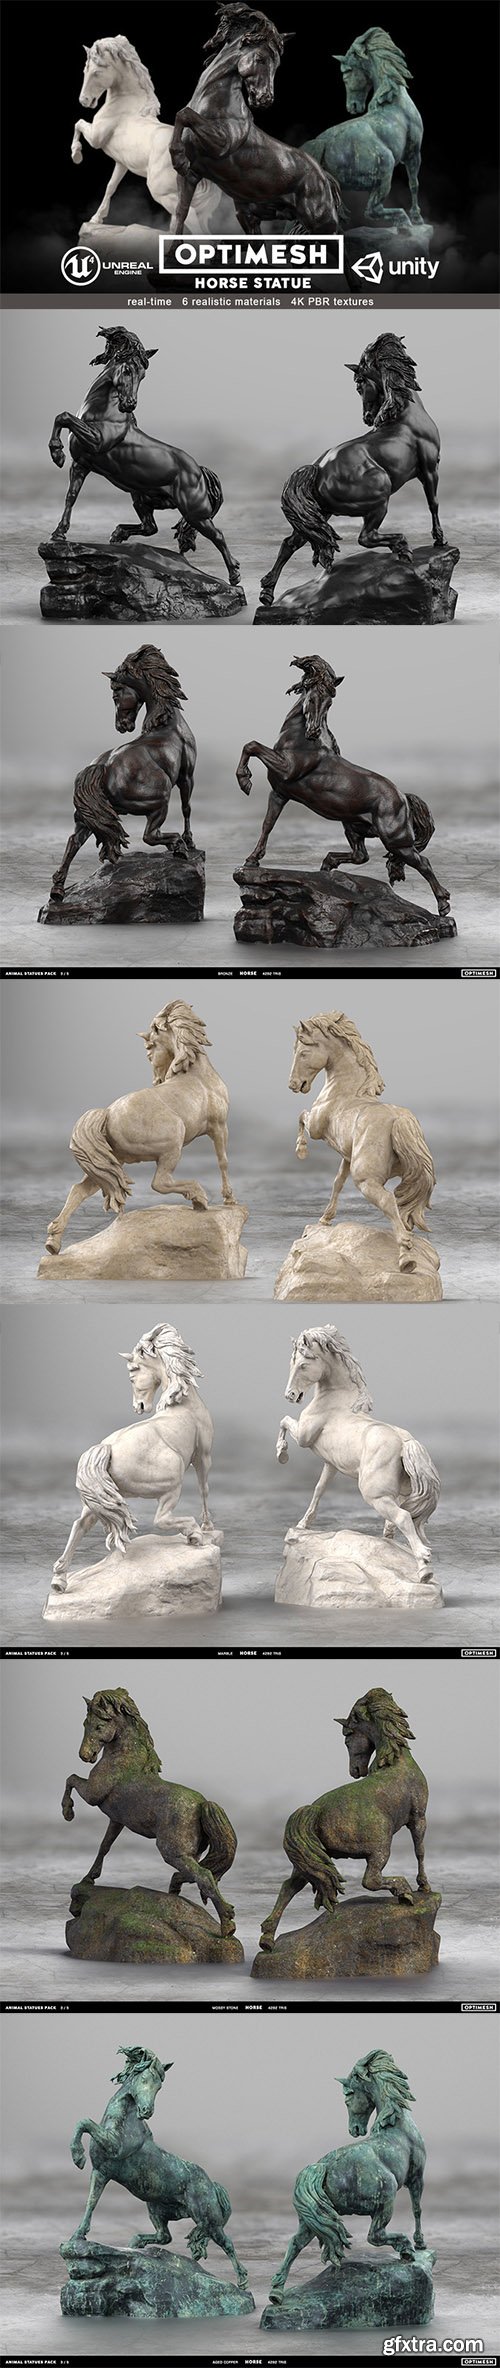 Cgtrader - Horse Statue - 3D PBR model Low-poly 3D model